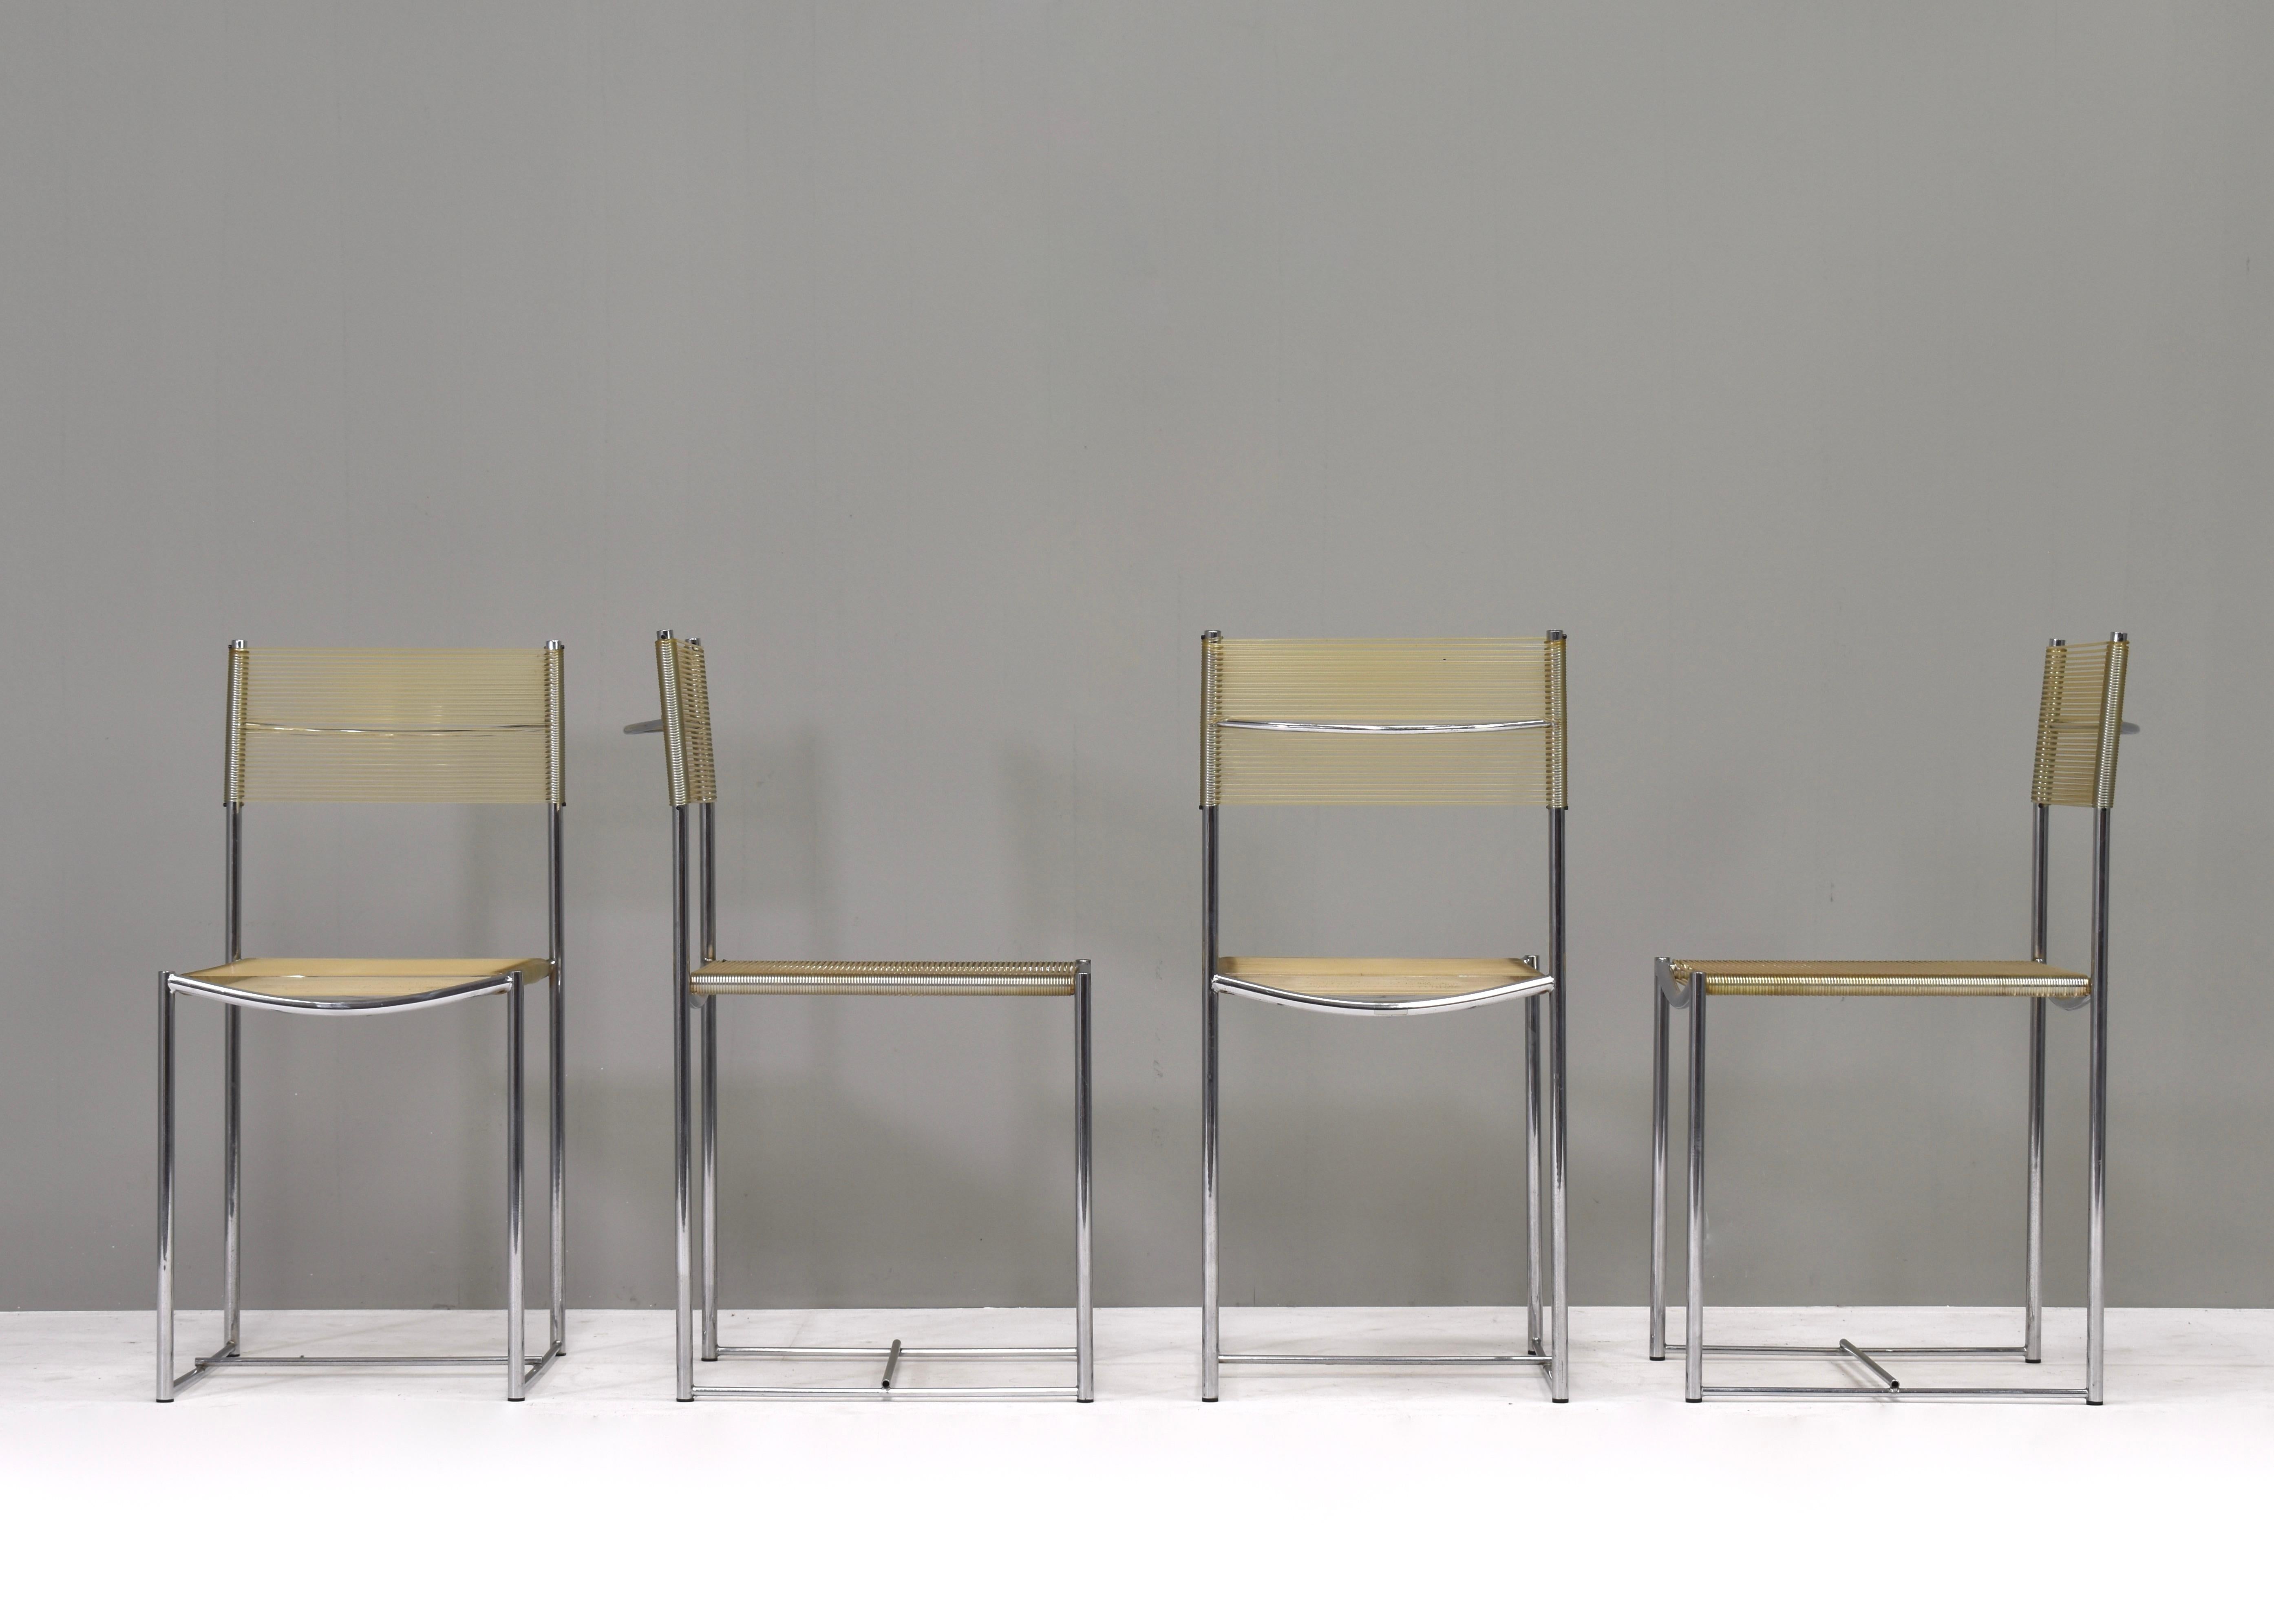 G. Belotti for Alias, set of four Spaghetti chairs (originaly named Odessa chairs) in chrome and rubber, Italy, 1979.
The Italian Postmodern Spaghetti chairs are designed by Giandomenico Belotti for manufacturer Alias. These chairs are also